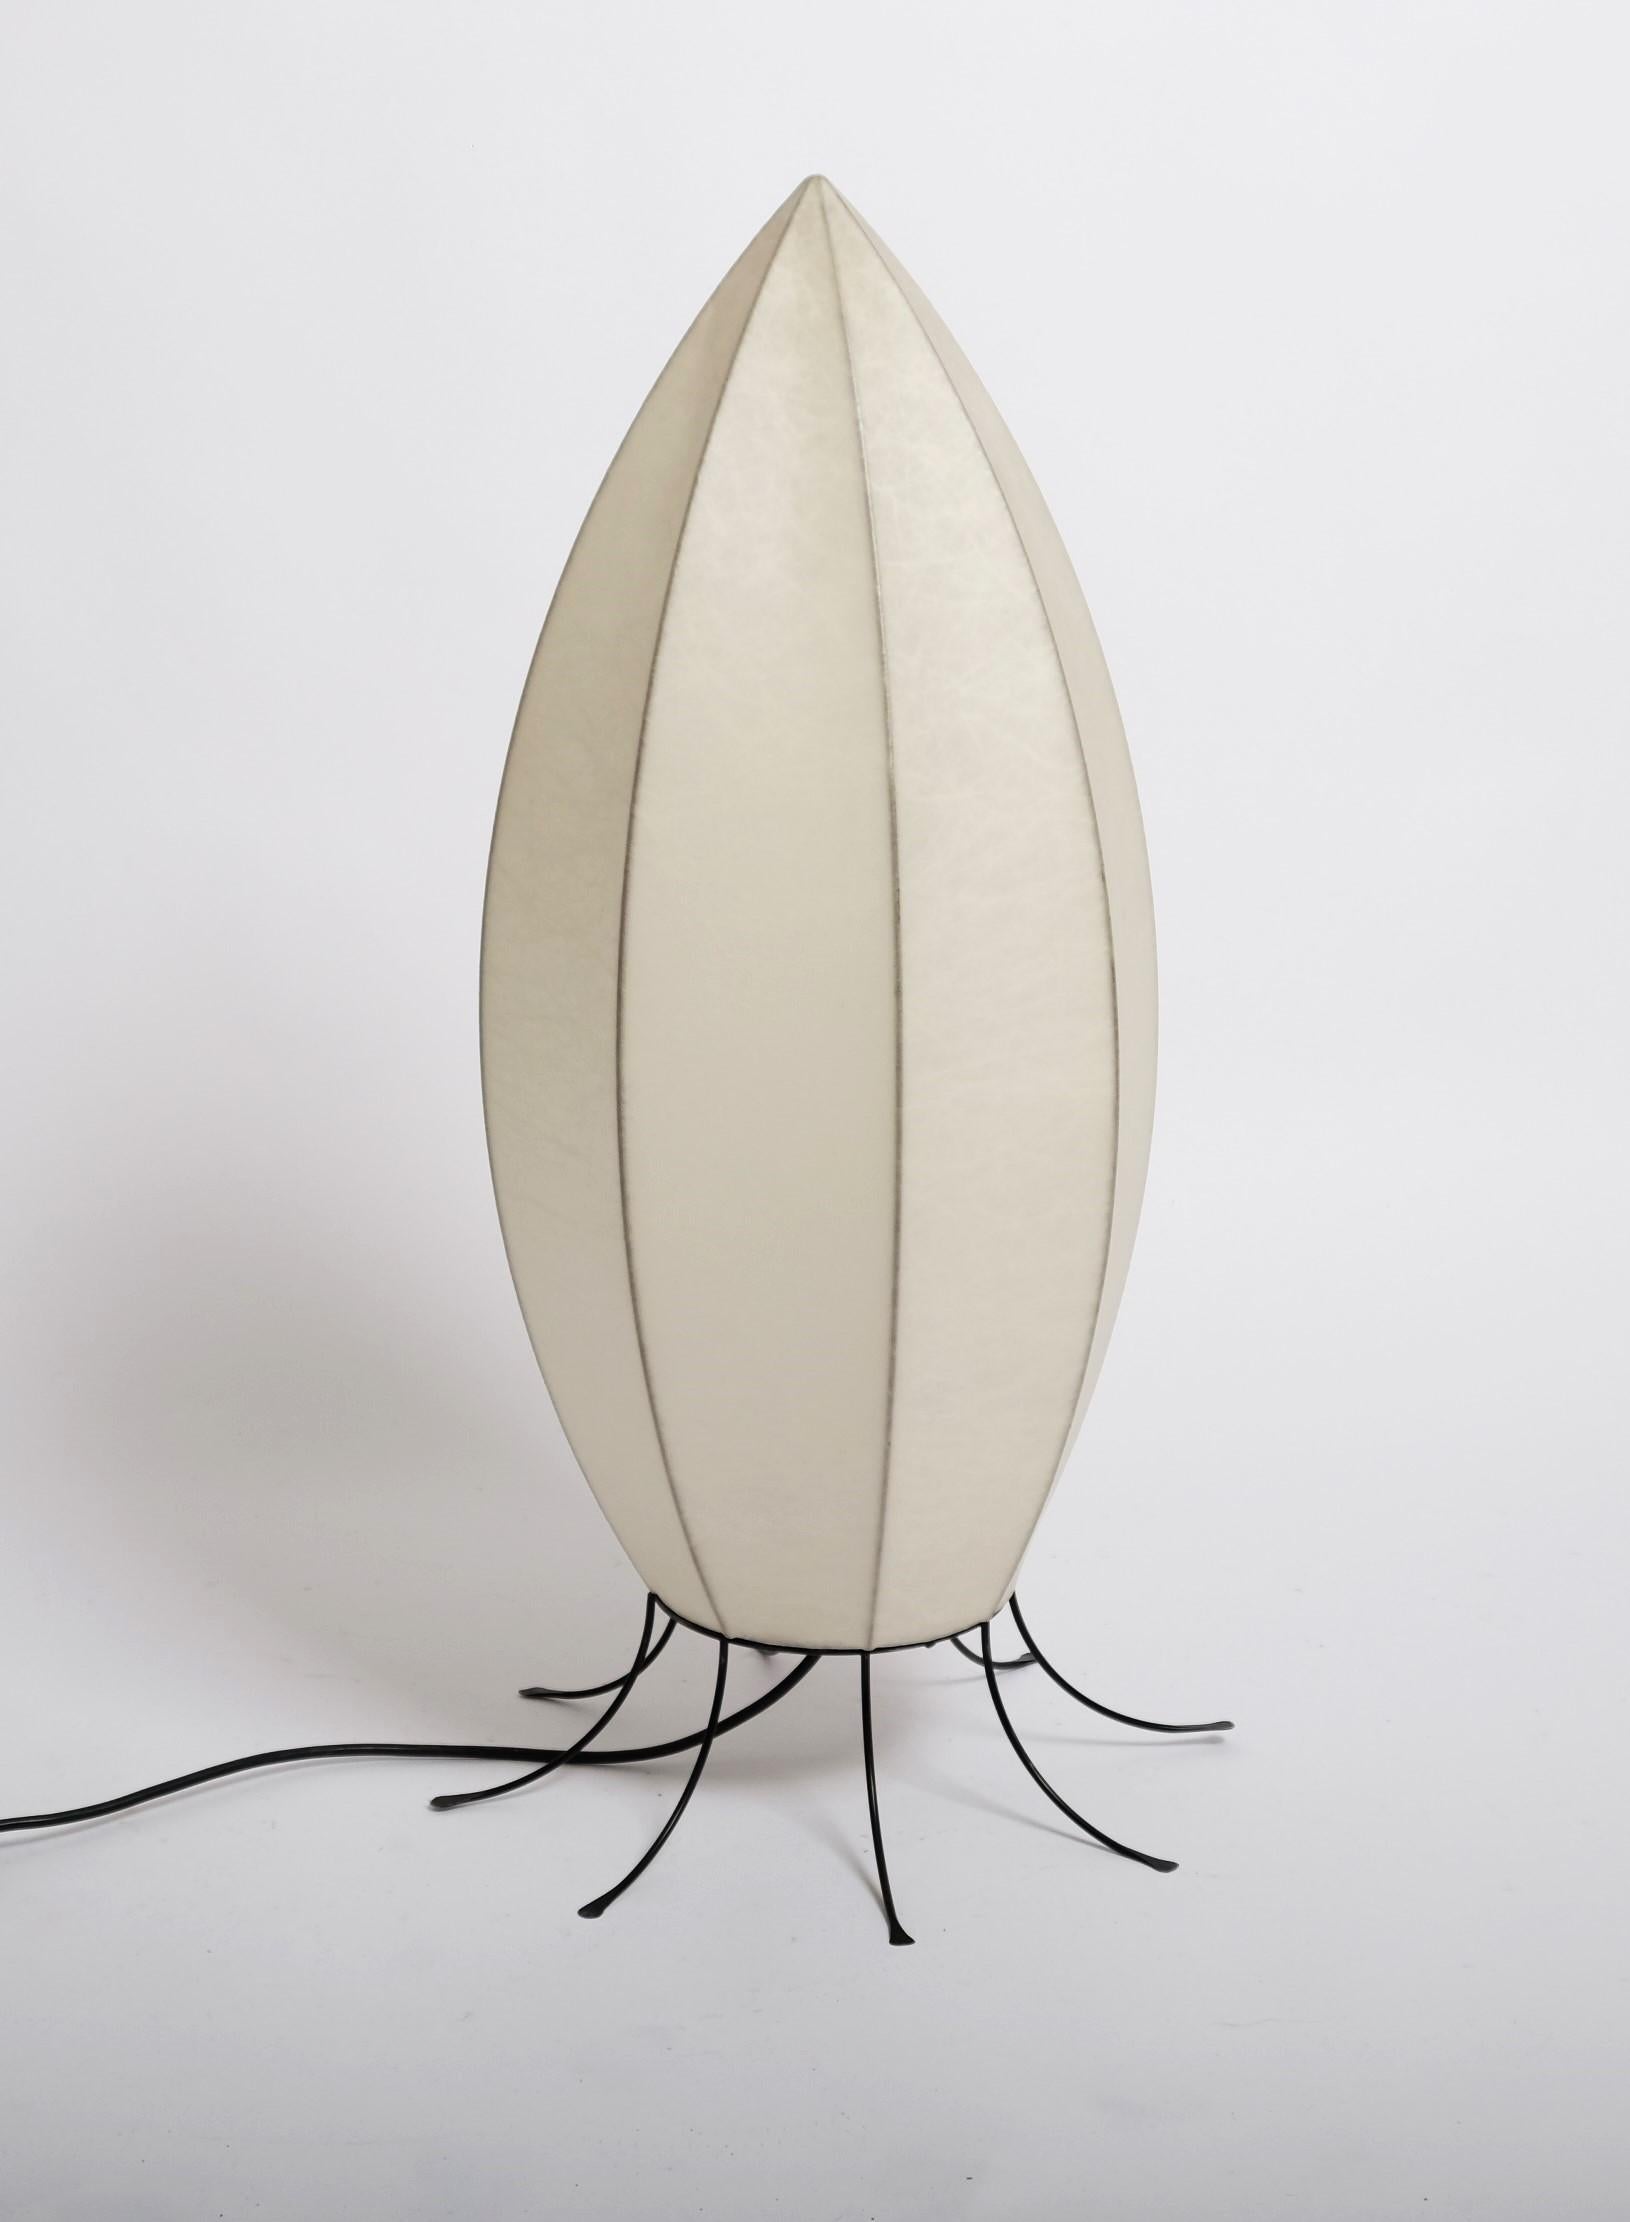 A cocoon floor lamp made in Italy in the 1960s. The floor lamp has been manufactured in the manner of the lamps made by Achille Castiglioni. The lamp shade is of original resin and has the shape of a rocket. 

Very good vintage condition with no